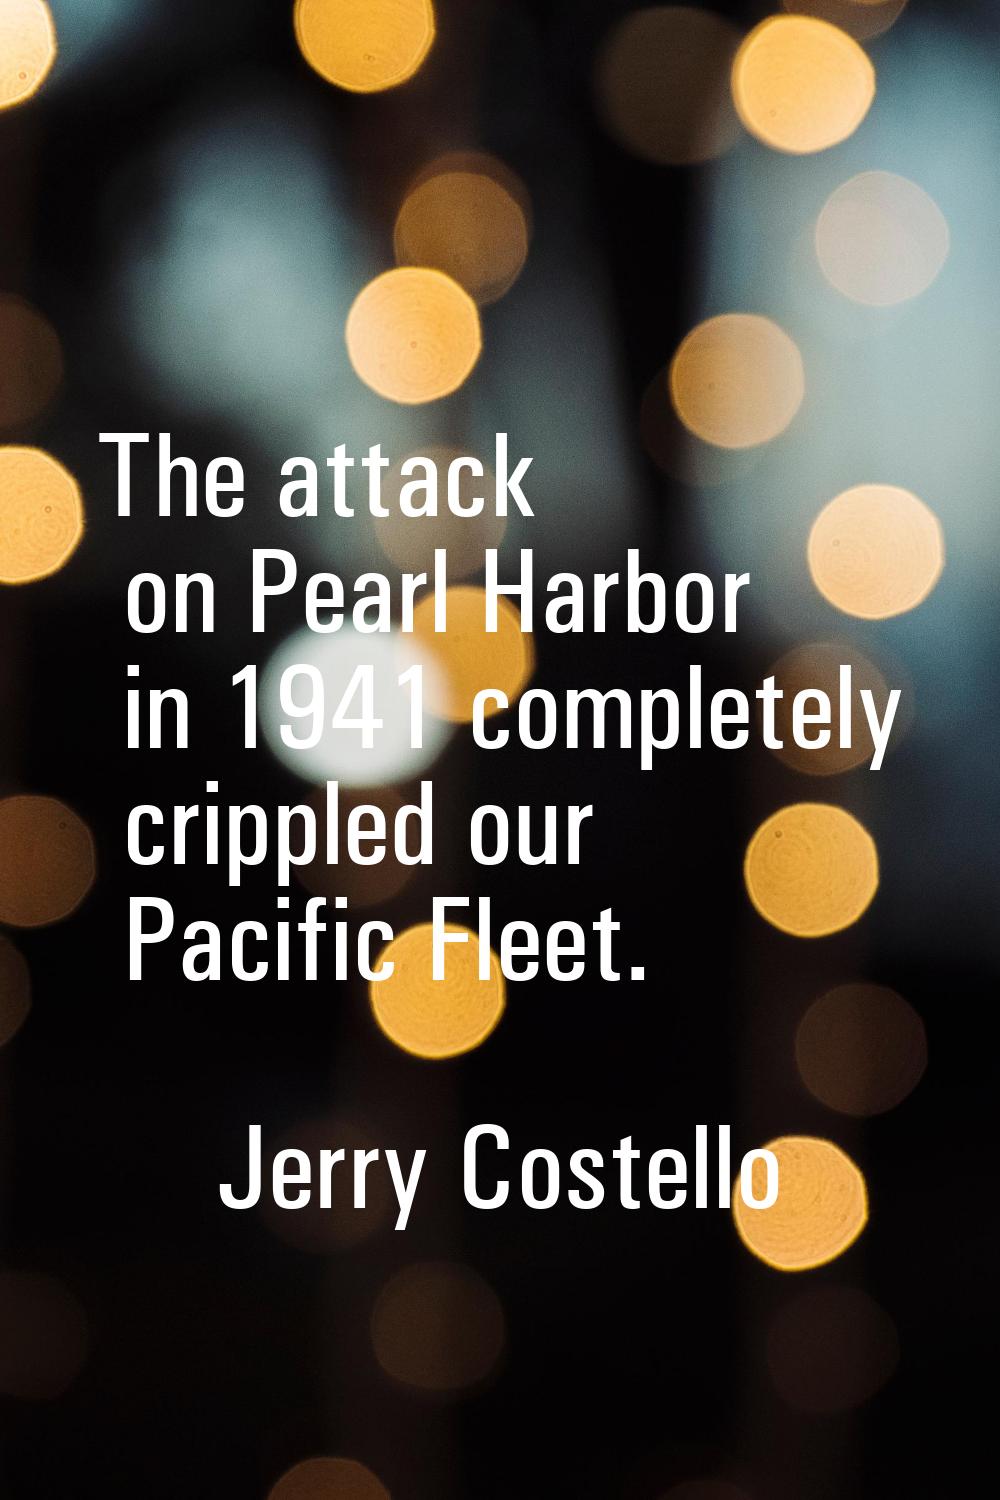 The attack on Pearl Harbor in 1941 completely crippled our Pacific Fleet.